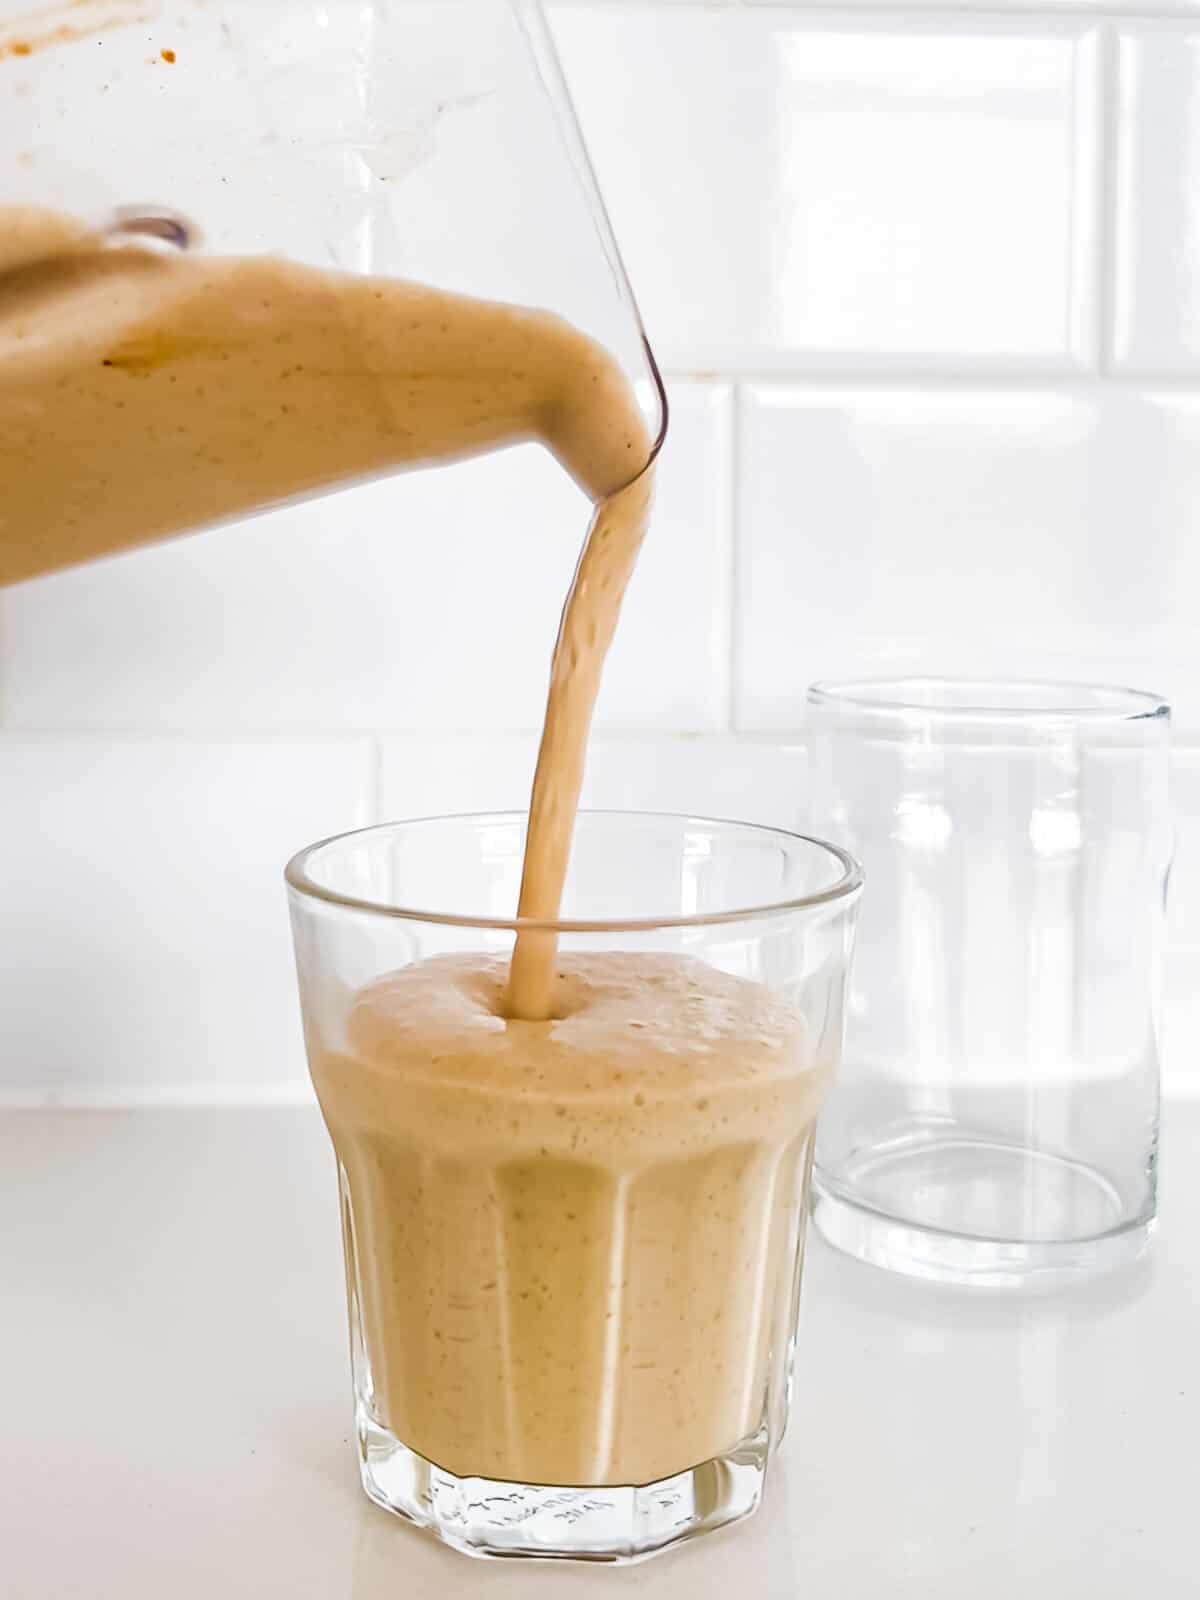 Pouring a banana coffee smoothie into small glasses to serve.